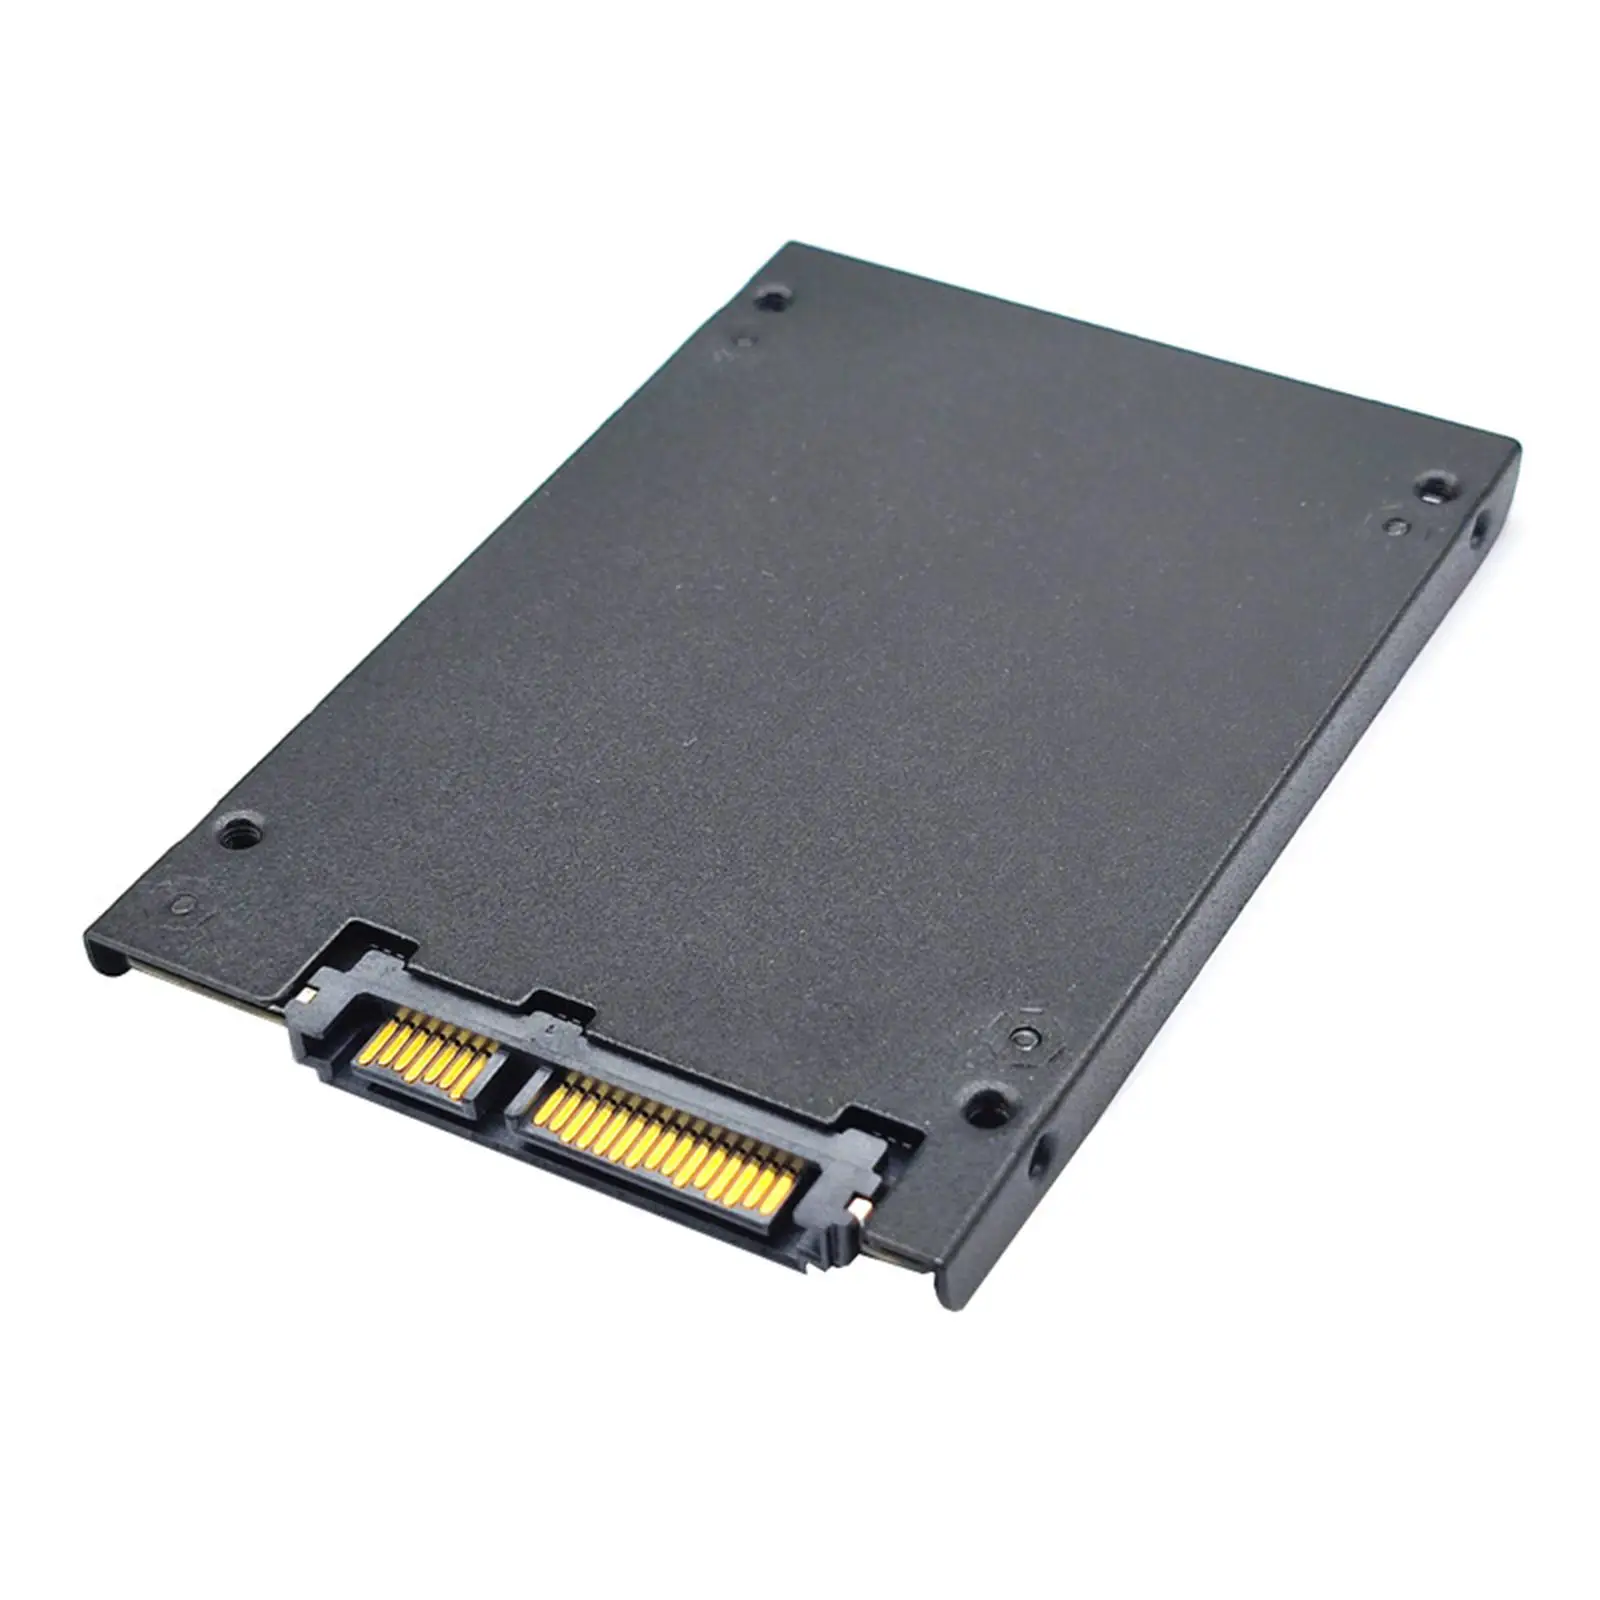 Adapter Card Connector Stable Transmission Expansion Card Transfer Card M.2 mSATA to SATA 22Pin for Assembly Desktop PC Fittings